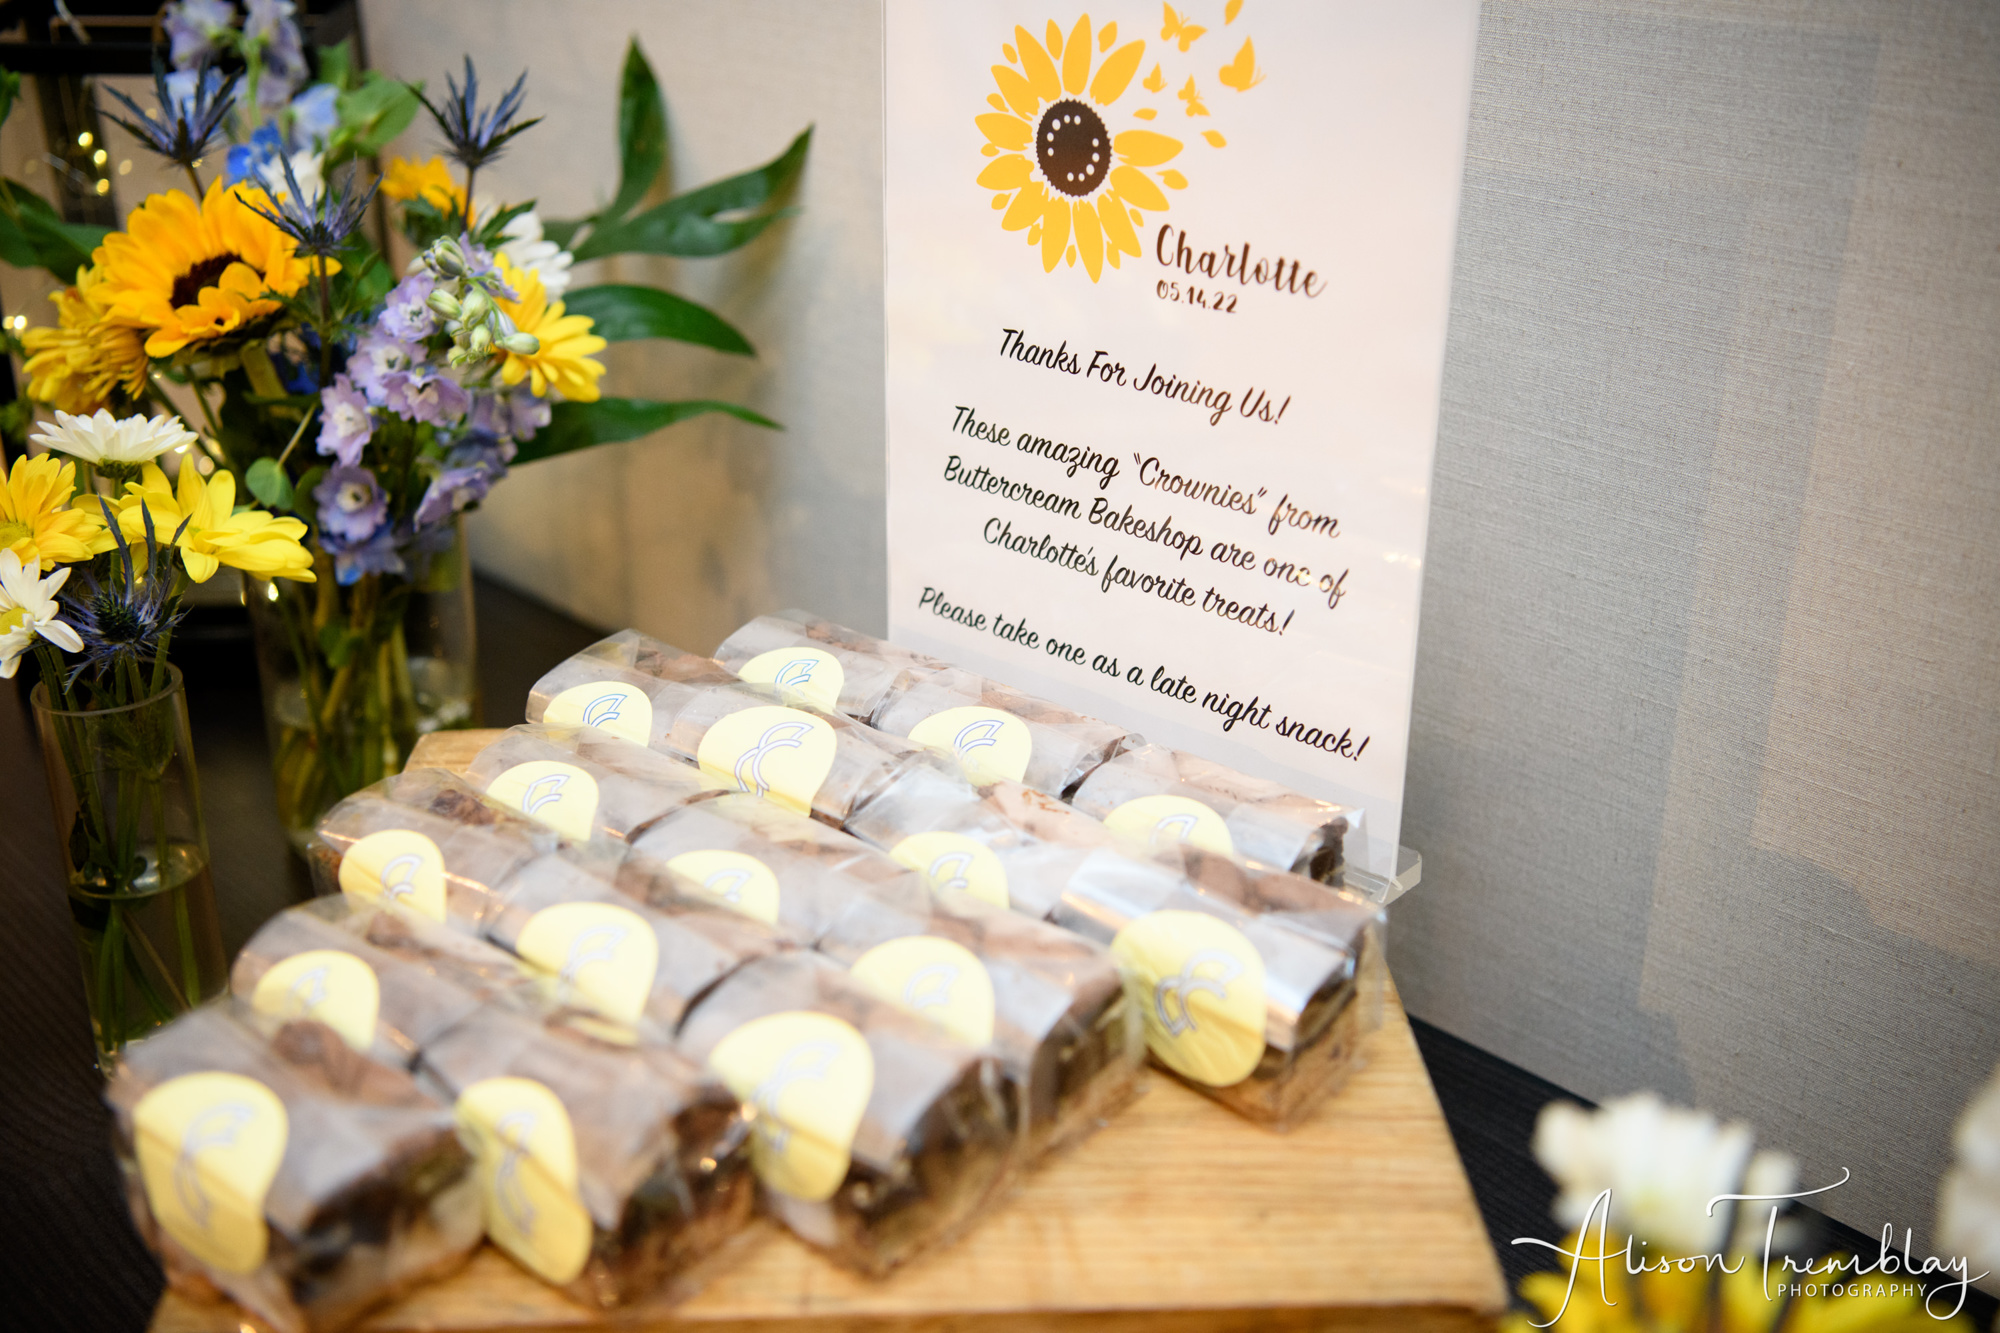 Charlotte's give aways with beautiful decor of flowers at Charlotte's Sunflower and Butterfly Bat Mitzvah Party at Eaton In Washington, DC | Pop Color Events | Adding a Pop of Color to Bar & Bat Mitzvahs in DC, MD & VA | Photo by: Alison Tremblay